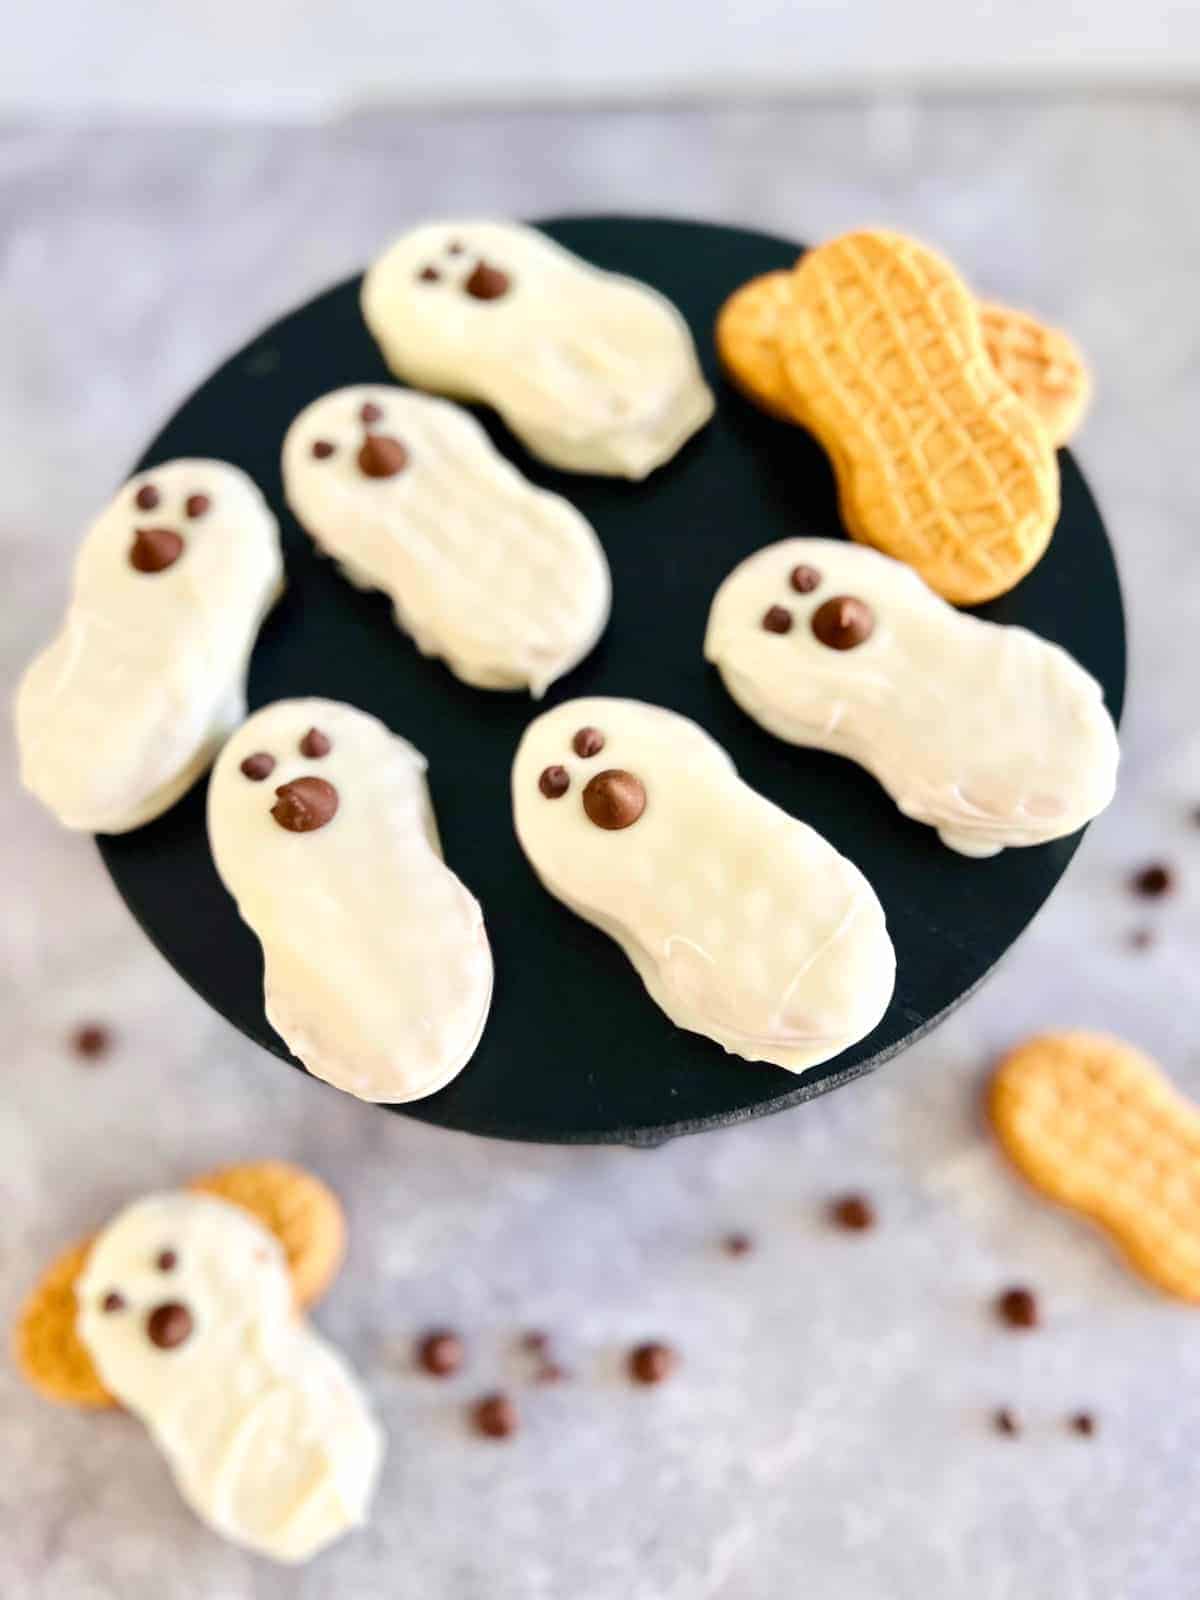 Ghost shaped white cookies on a black plate.